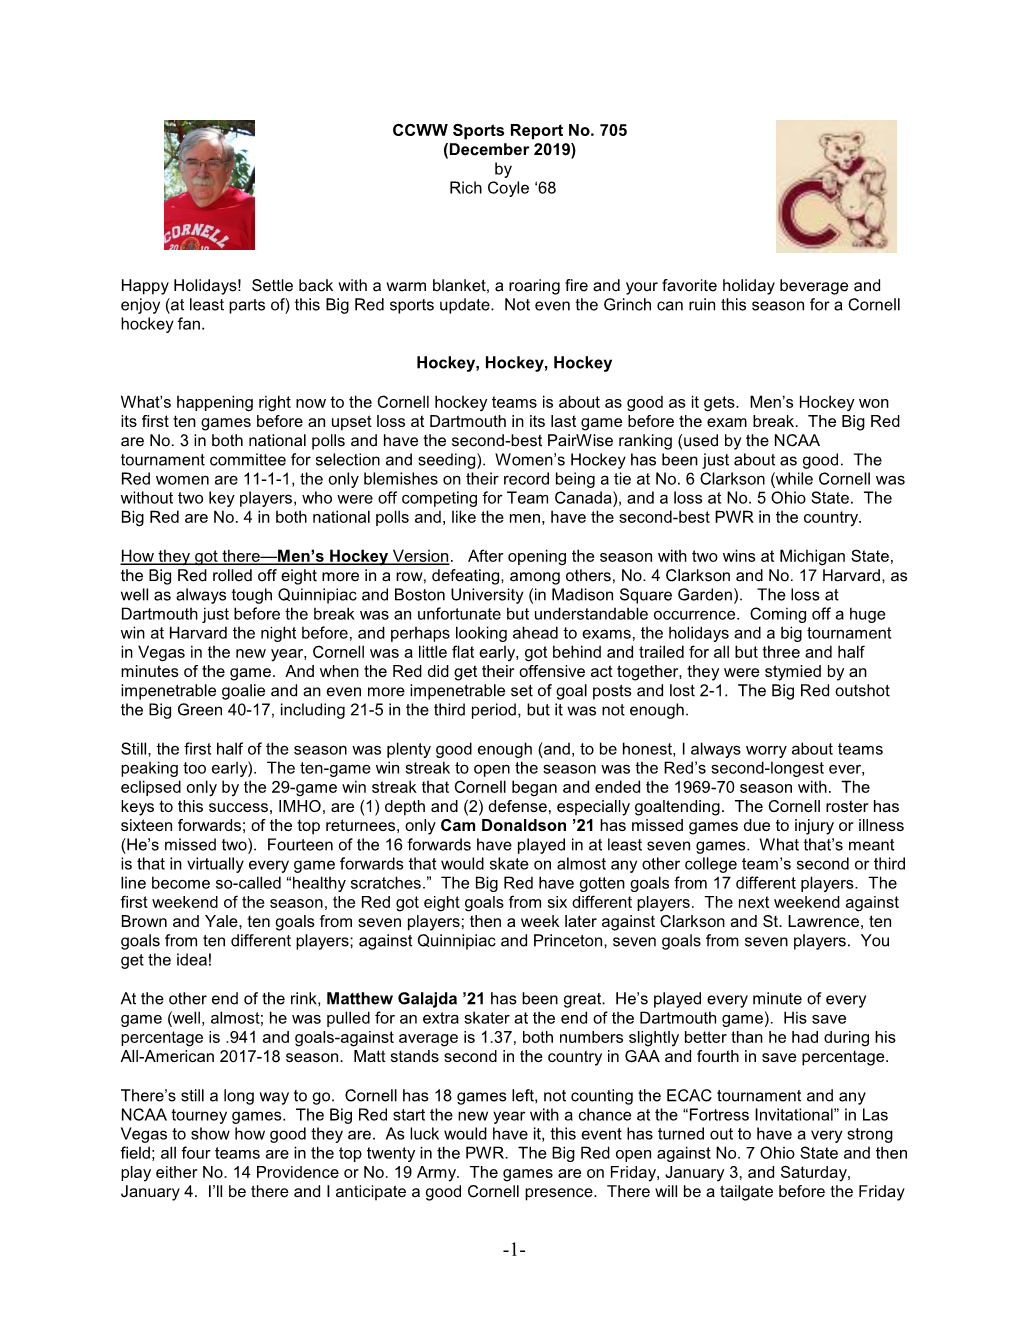 CCWW Sports Report No. 705 (December 2019) by Rich Coyle '68 Happy Holidays! Settle Back with a Warm Blanket, a Roaring Fire